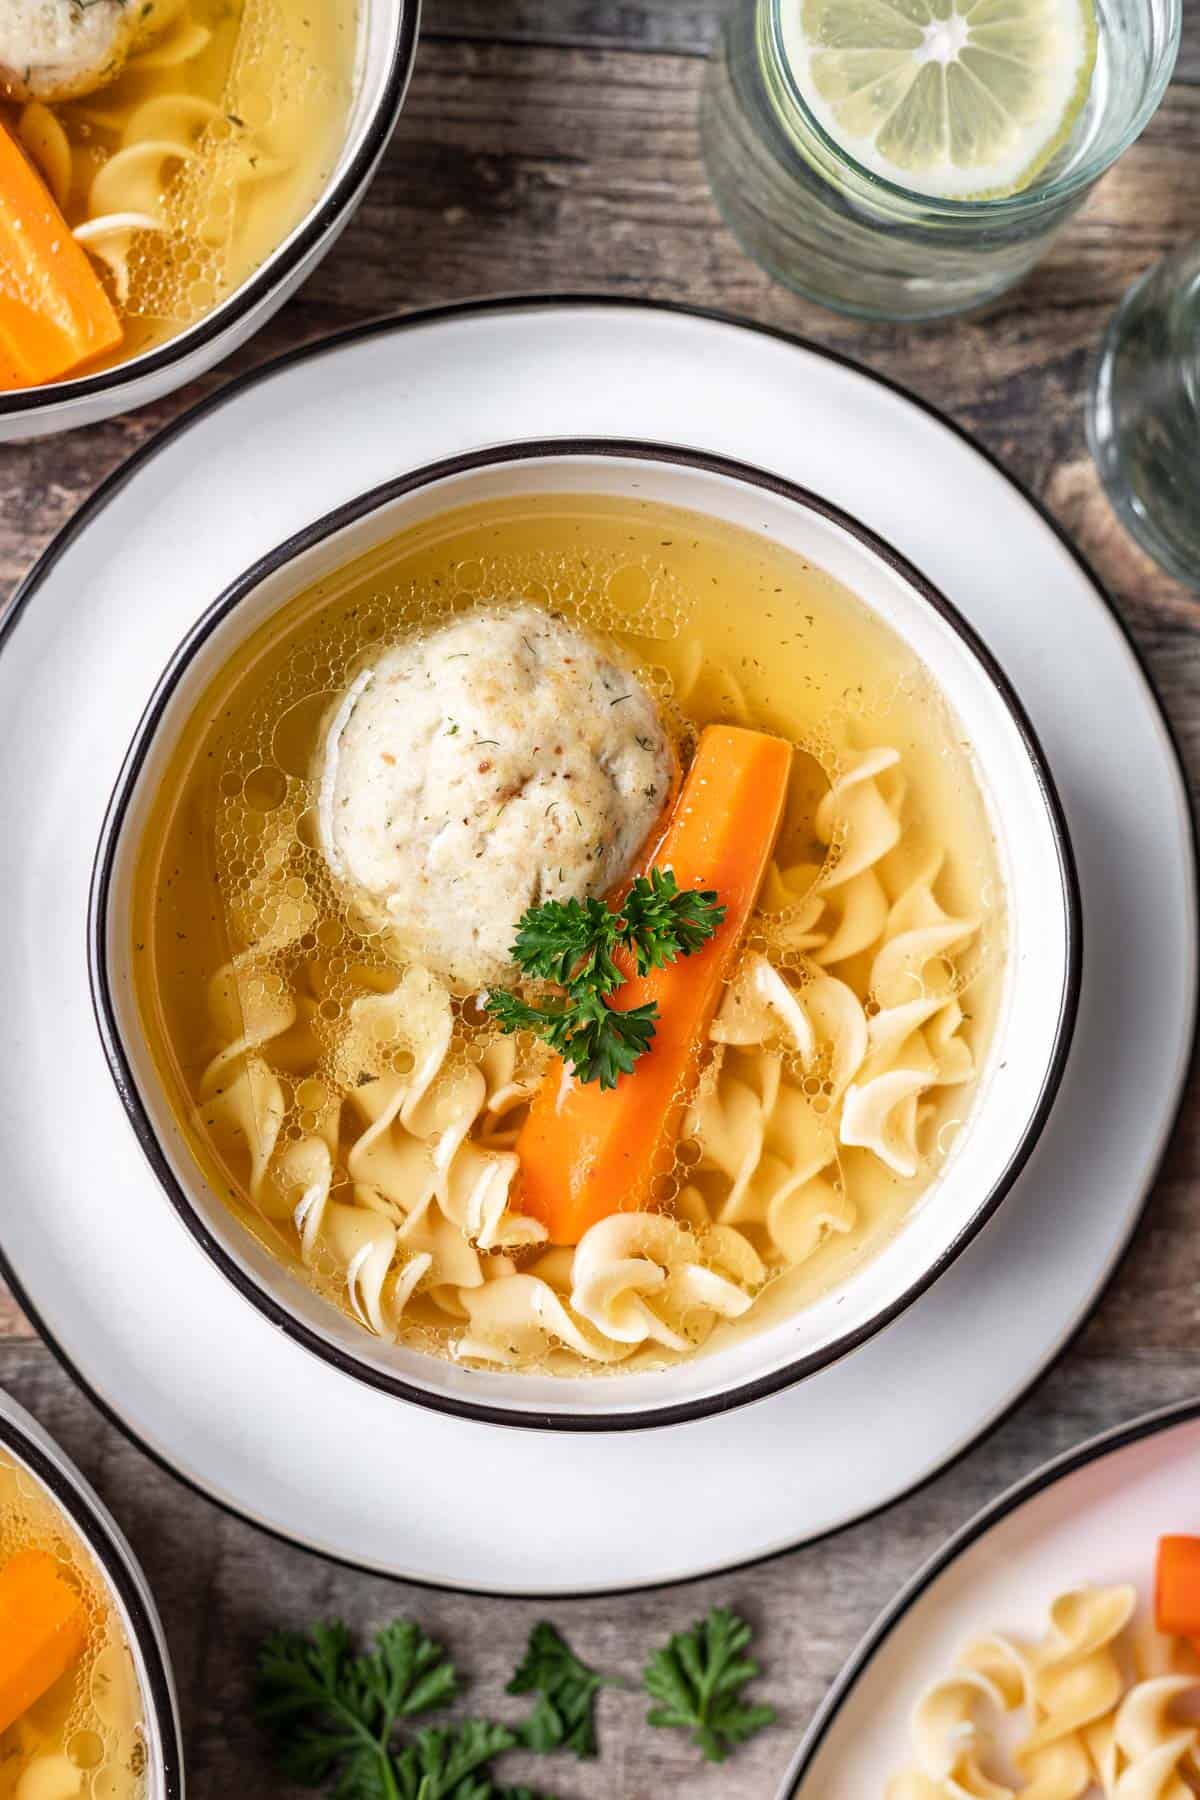 Instant pot matzo ball soup in a bowl with a cooked carrot and egg noodles.